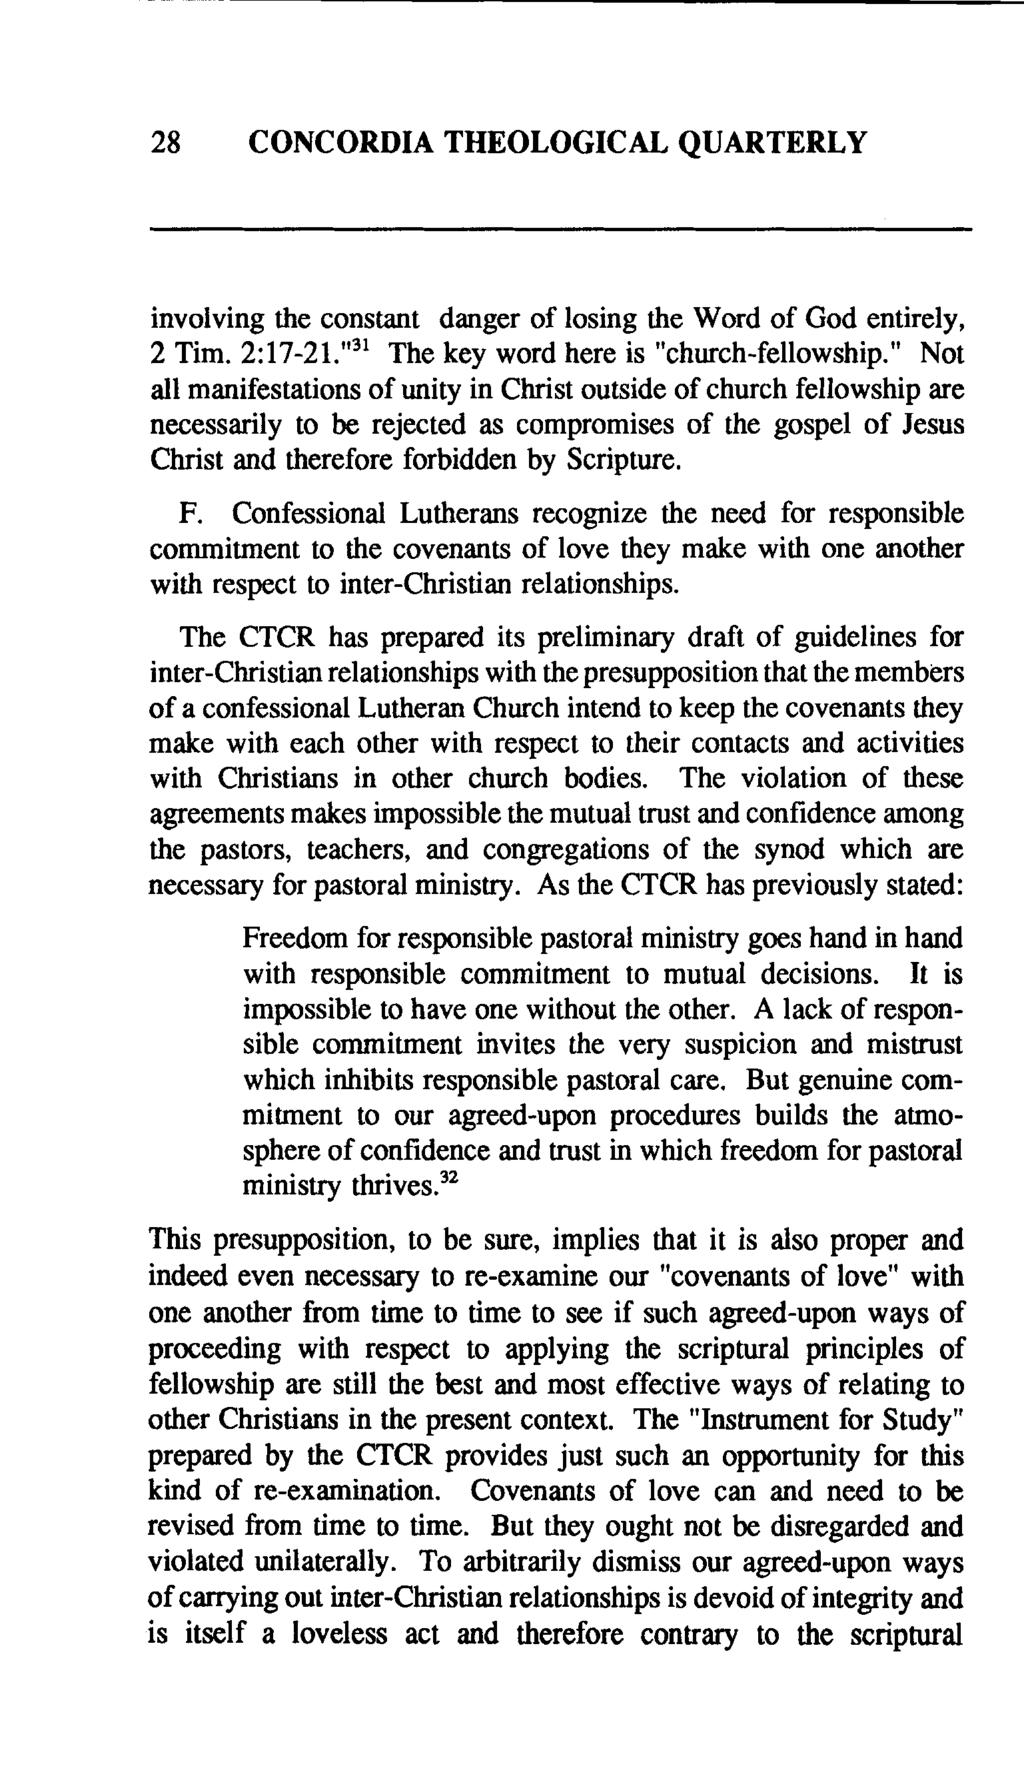 28 CONCORDIA THEOLOGICAL QUARTERLY involving the constant danger of losing the Word of God entirely, 2 Tim. 2:17-21."31 The key word here is "church-fellowship.